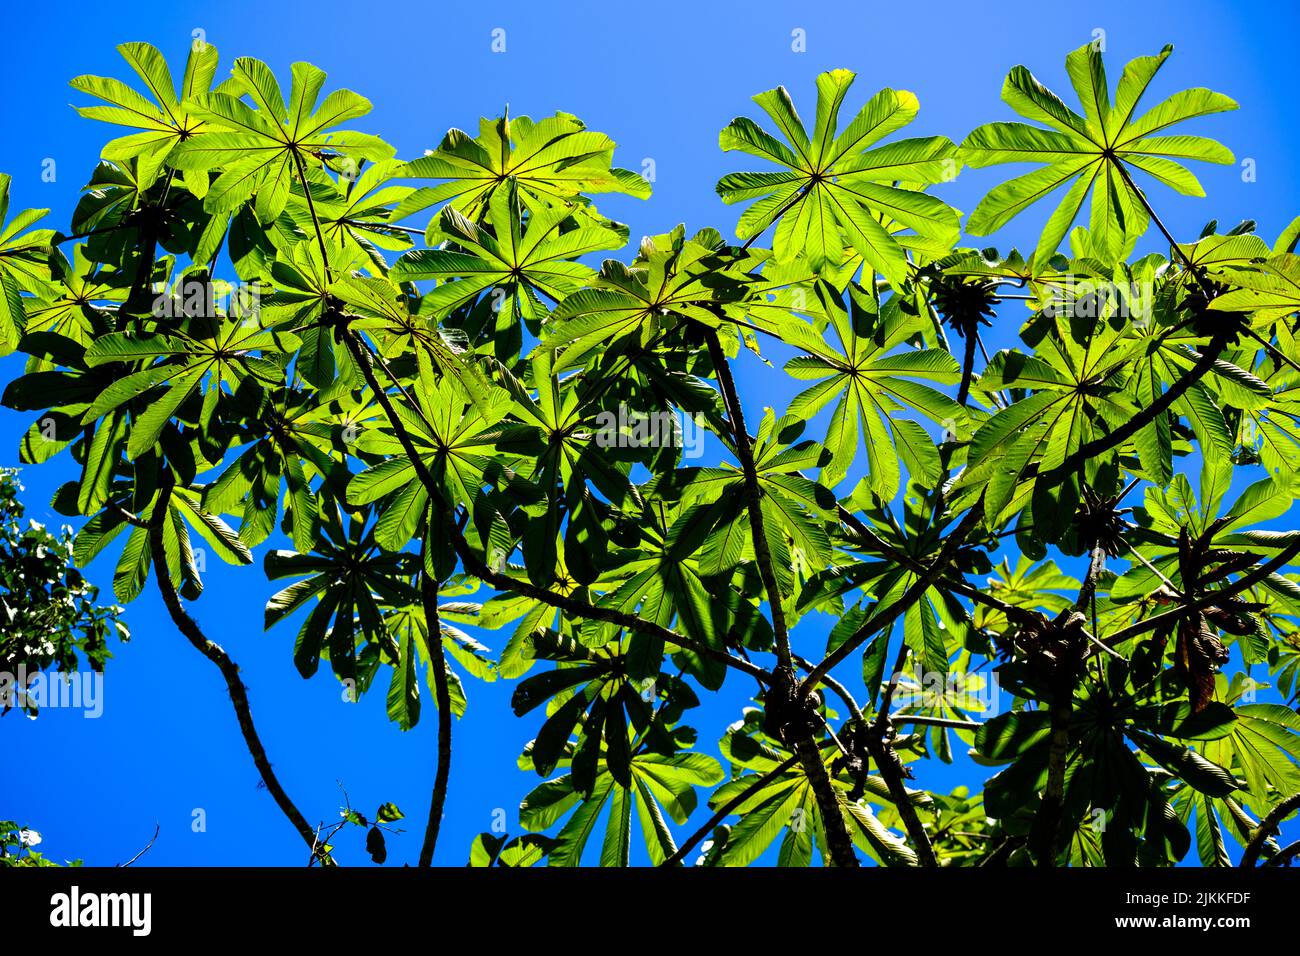 A low angle shot of green leaves of cecropia obtusifolia plant against blue sky in bright sunlight Stock Photo